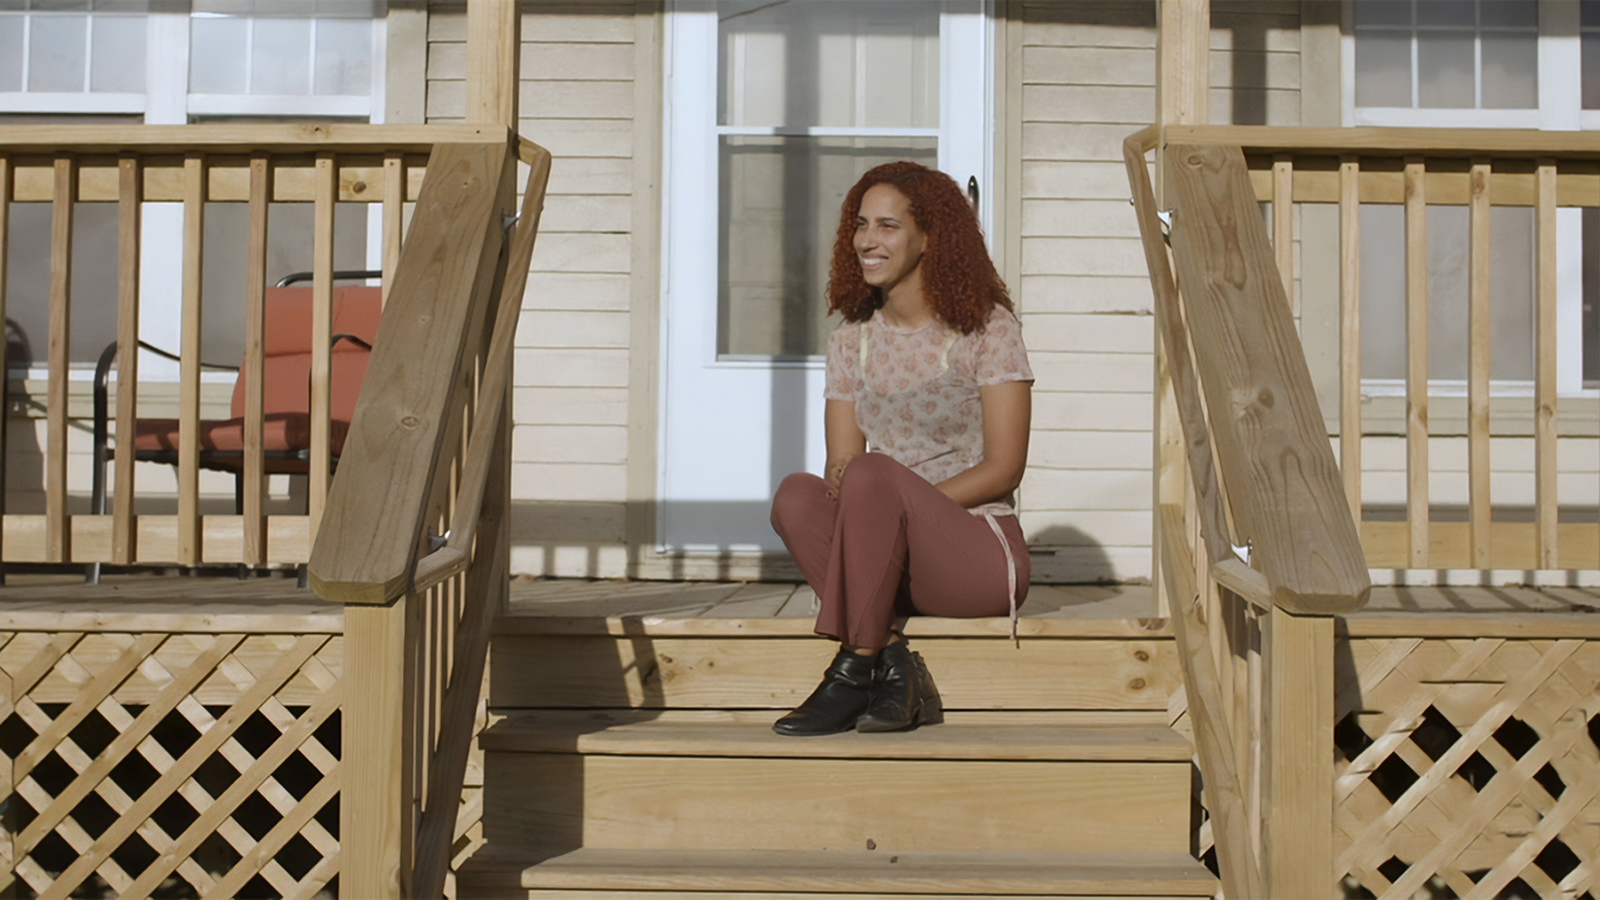 A smiling woman sits on her porch.